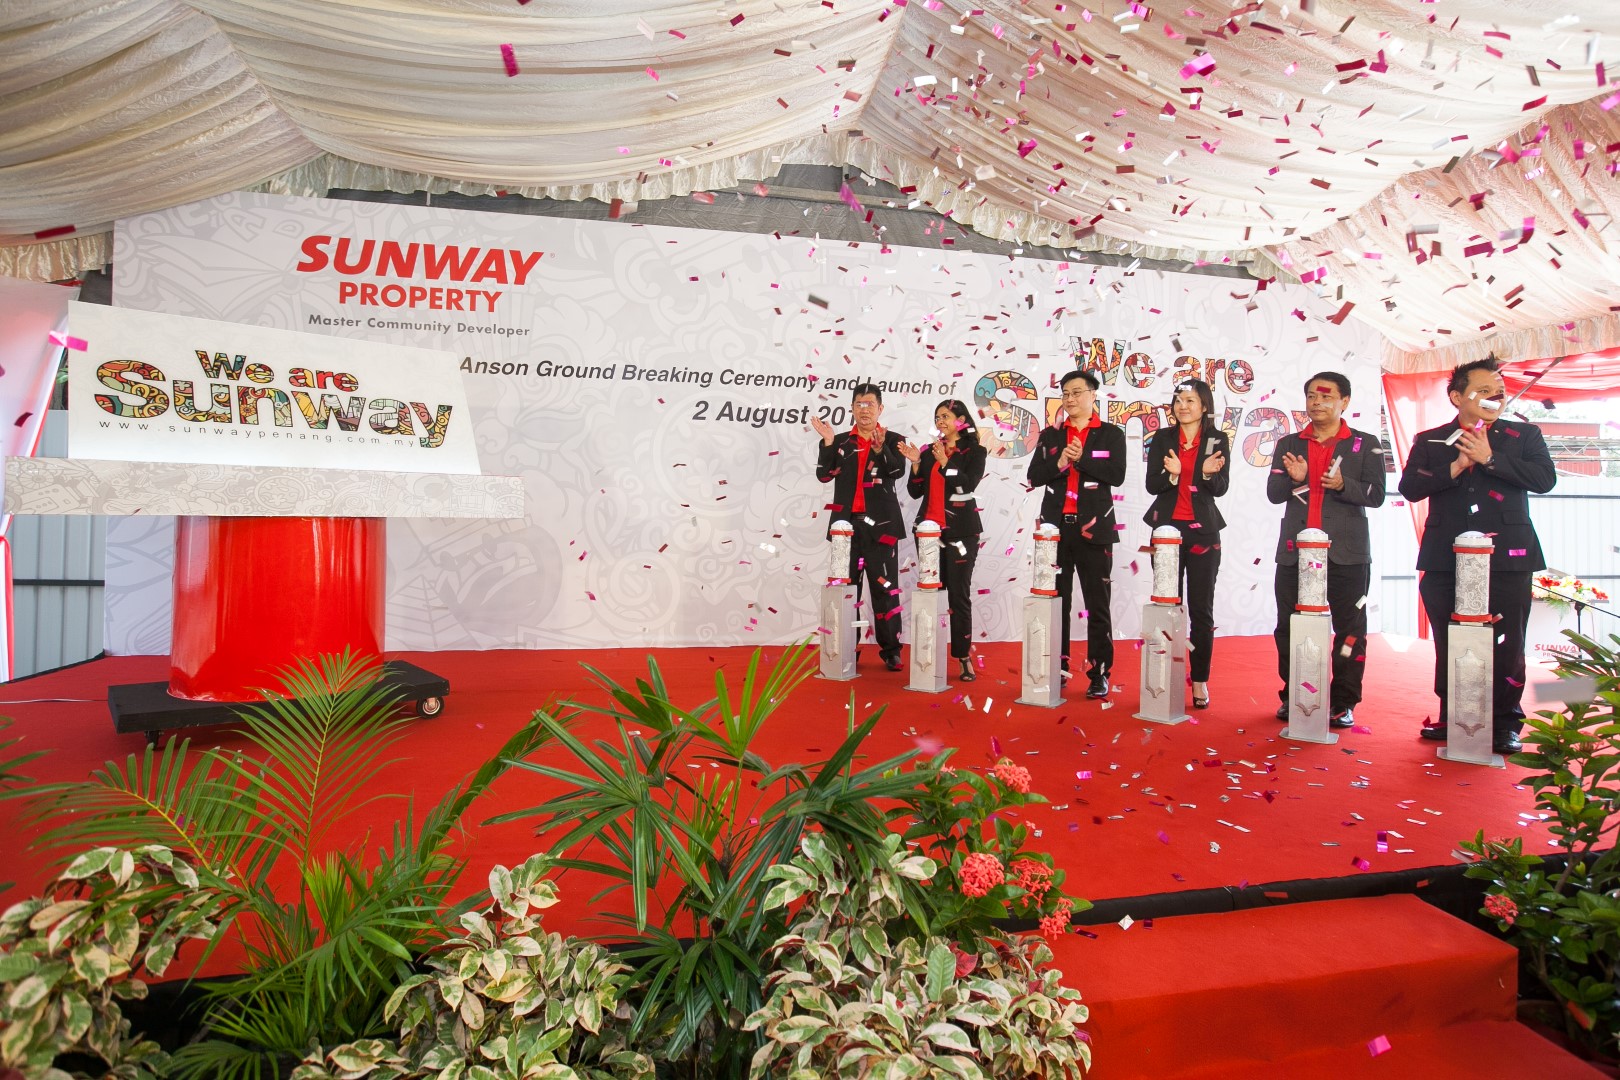 “We Are Sunway” campaign officially launched by the VIPs at the Ground Breaking Ceremony of Sunway Property @ Anson.